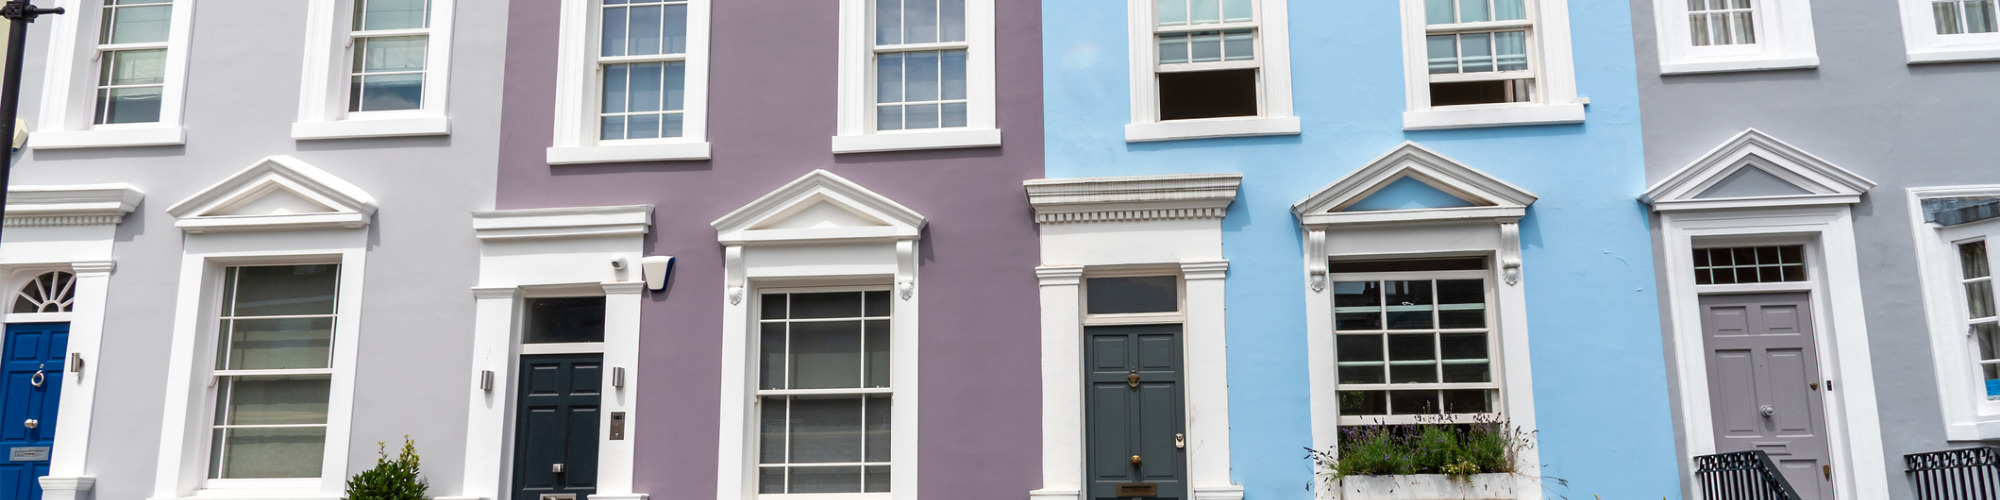 Tax & UK Residential Property - A Guide to the Latest Changes 